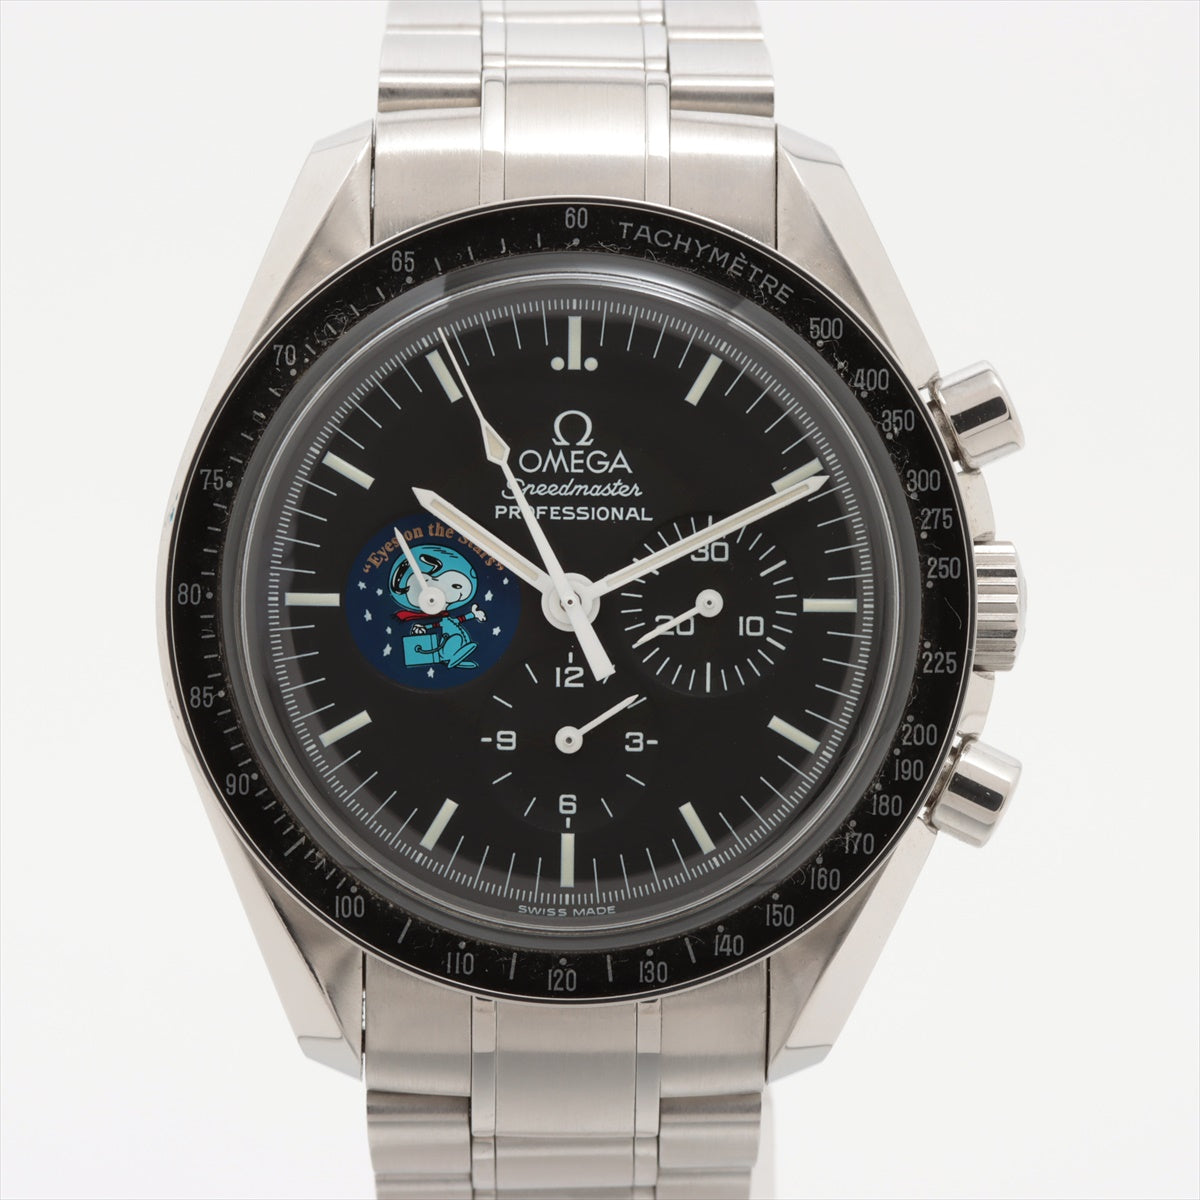 Omega Speedmaster Professional Snoopy 3578.51 SS Manual Winding Black Dial 3 Extra Links